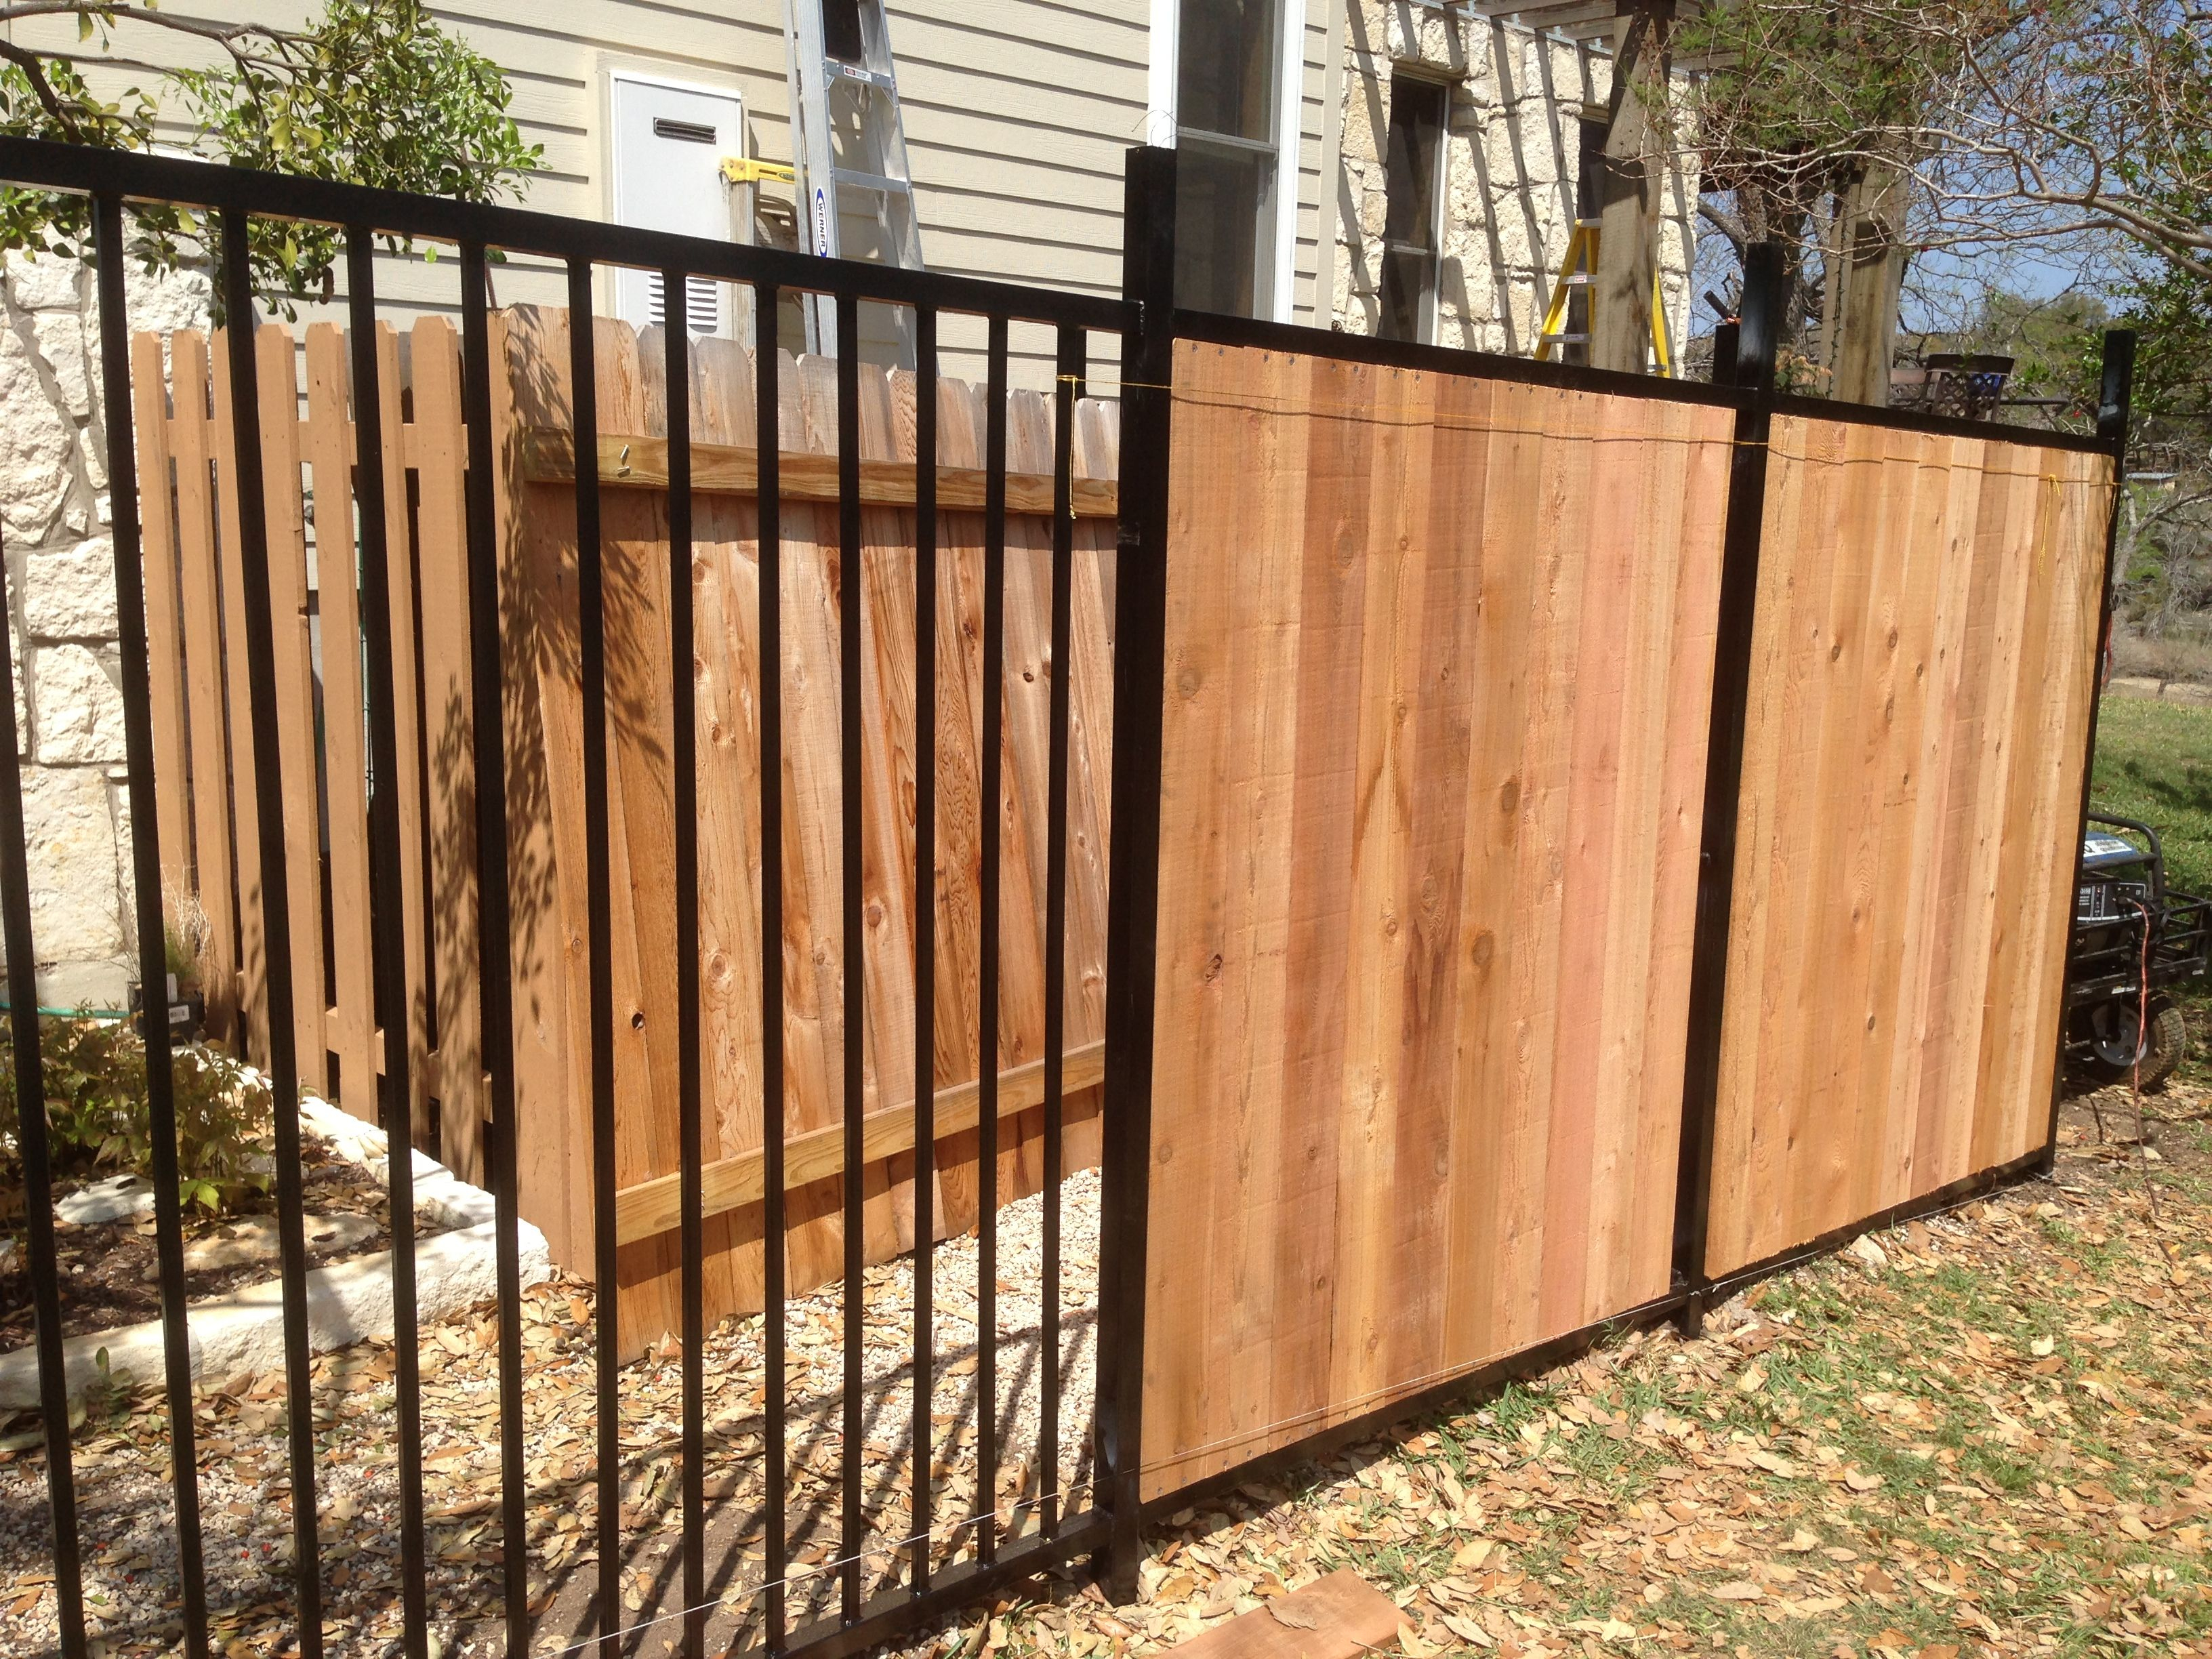 Custom Wrought Iron Fence Transitioning Into Privacy Cedar Fence inside sizing 3264 X 2448